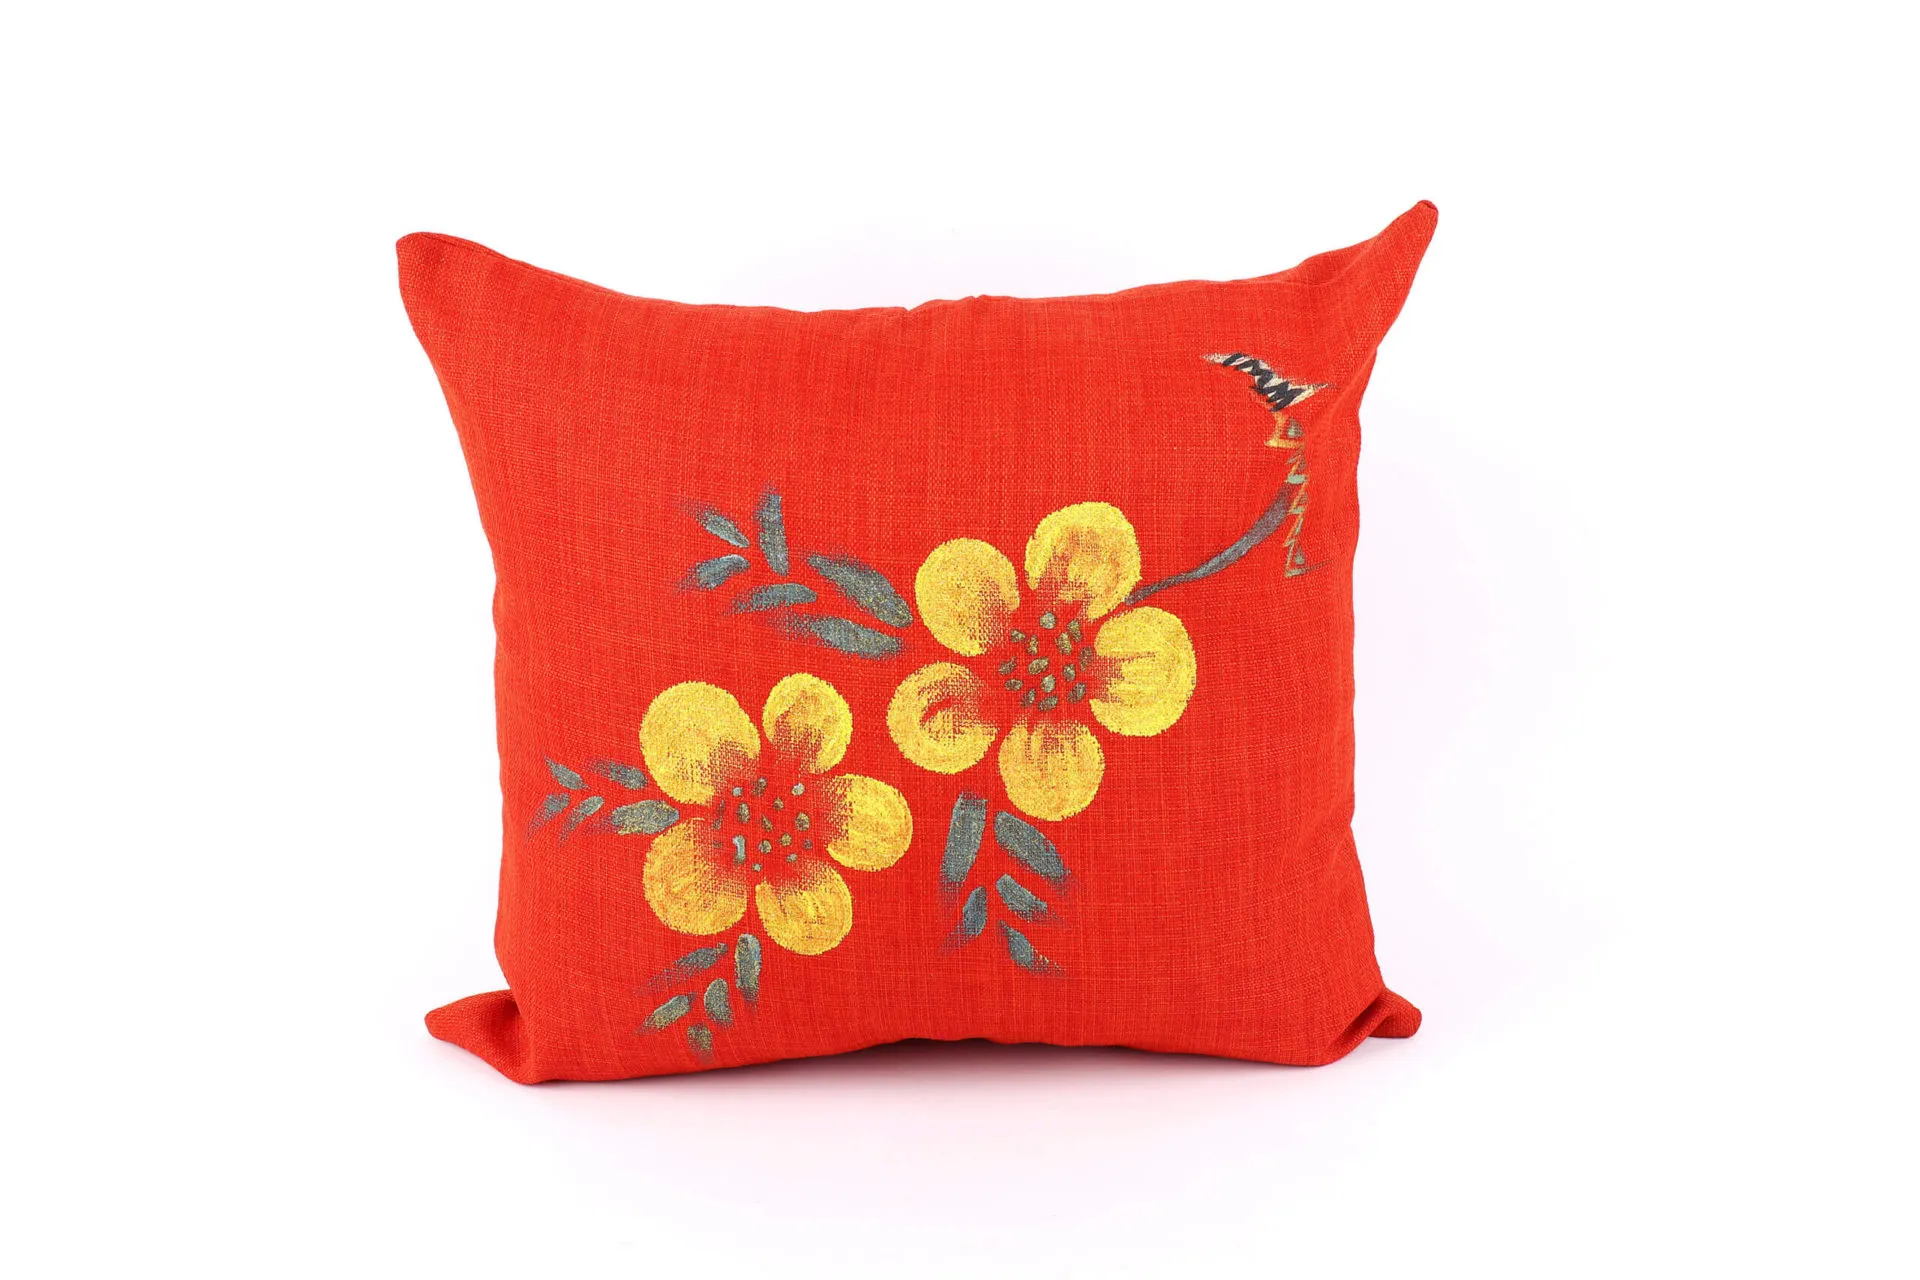 Throwpillow by bosh design on bellafricana marketplace